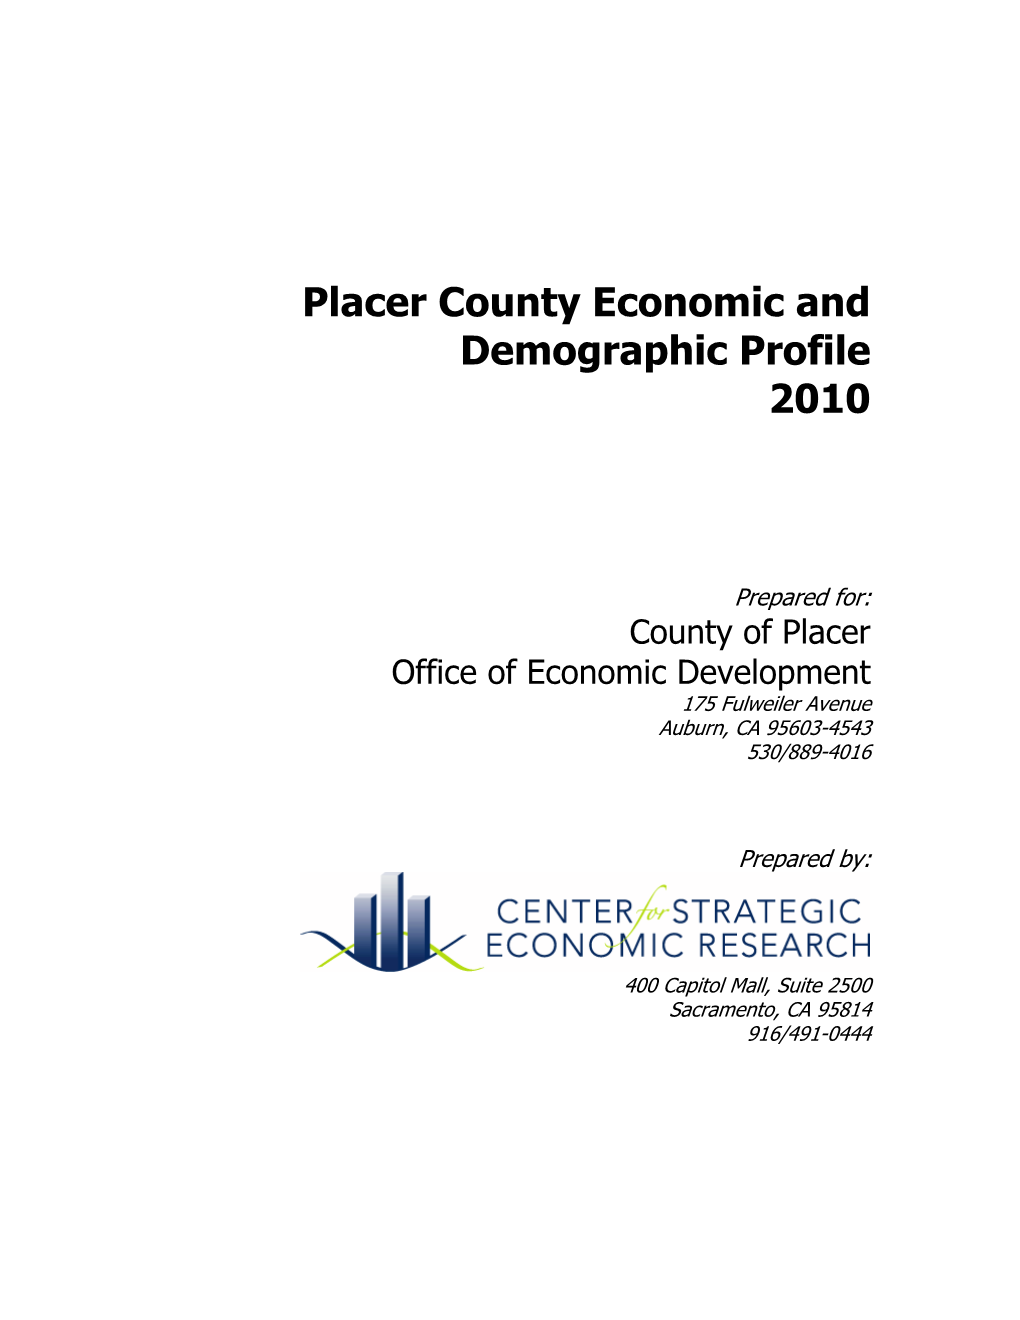 Placer County Economic and Demographic Profile 2010